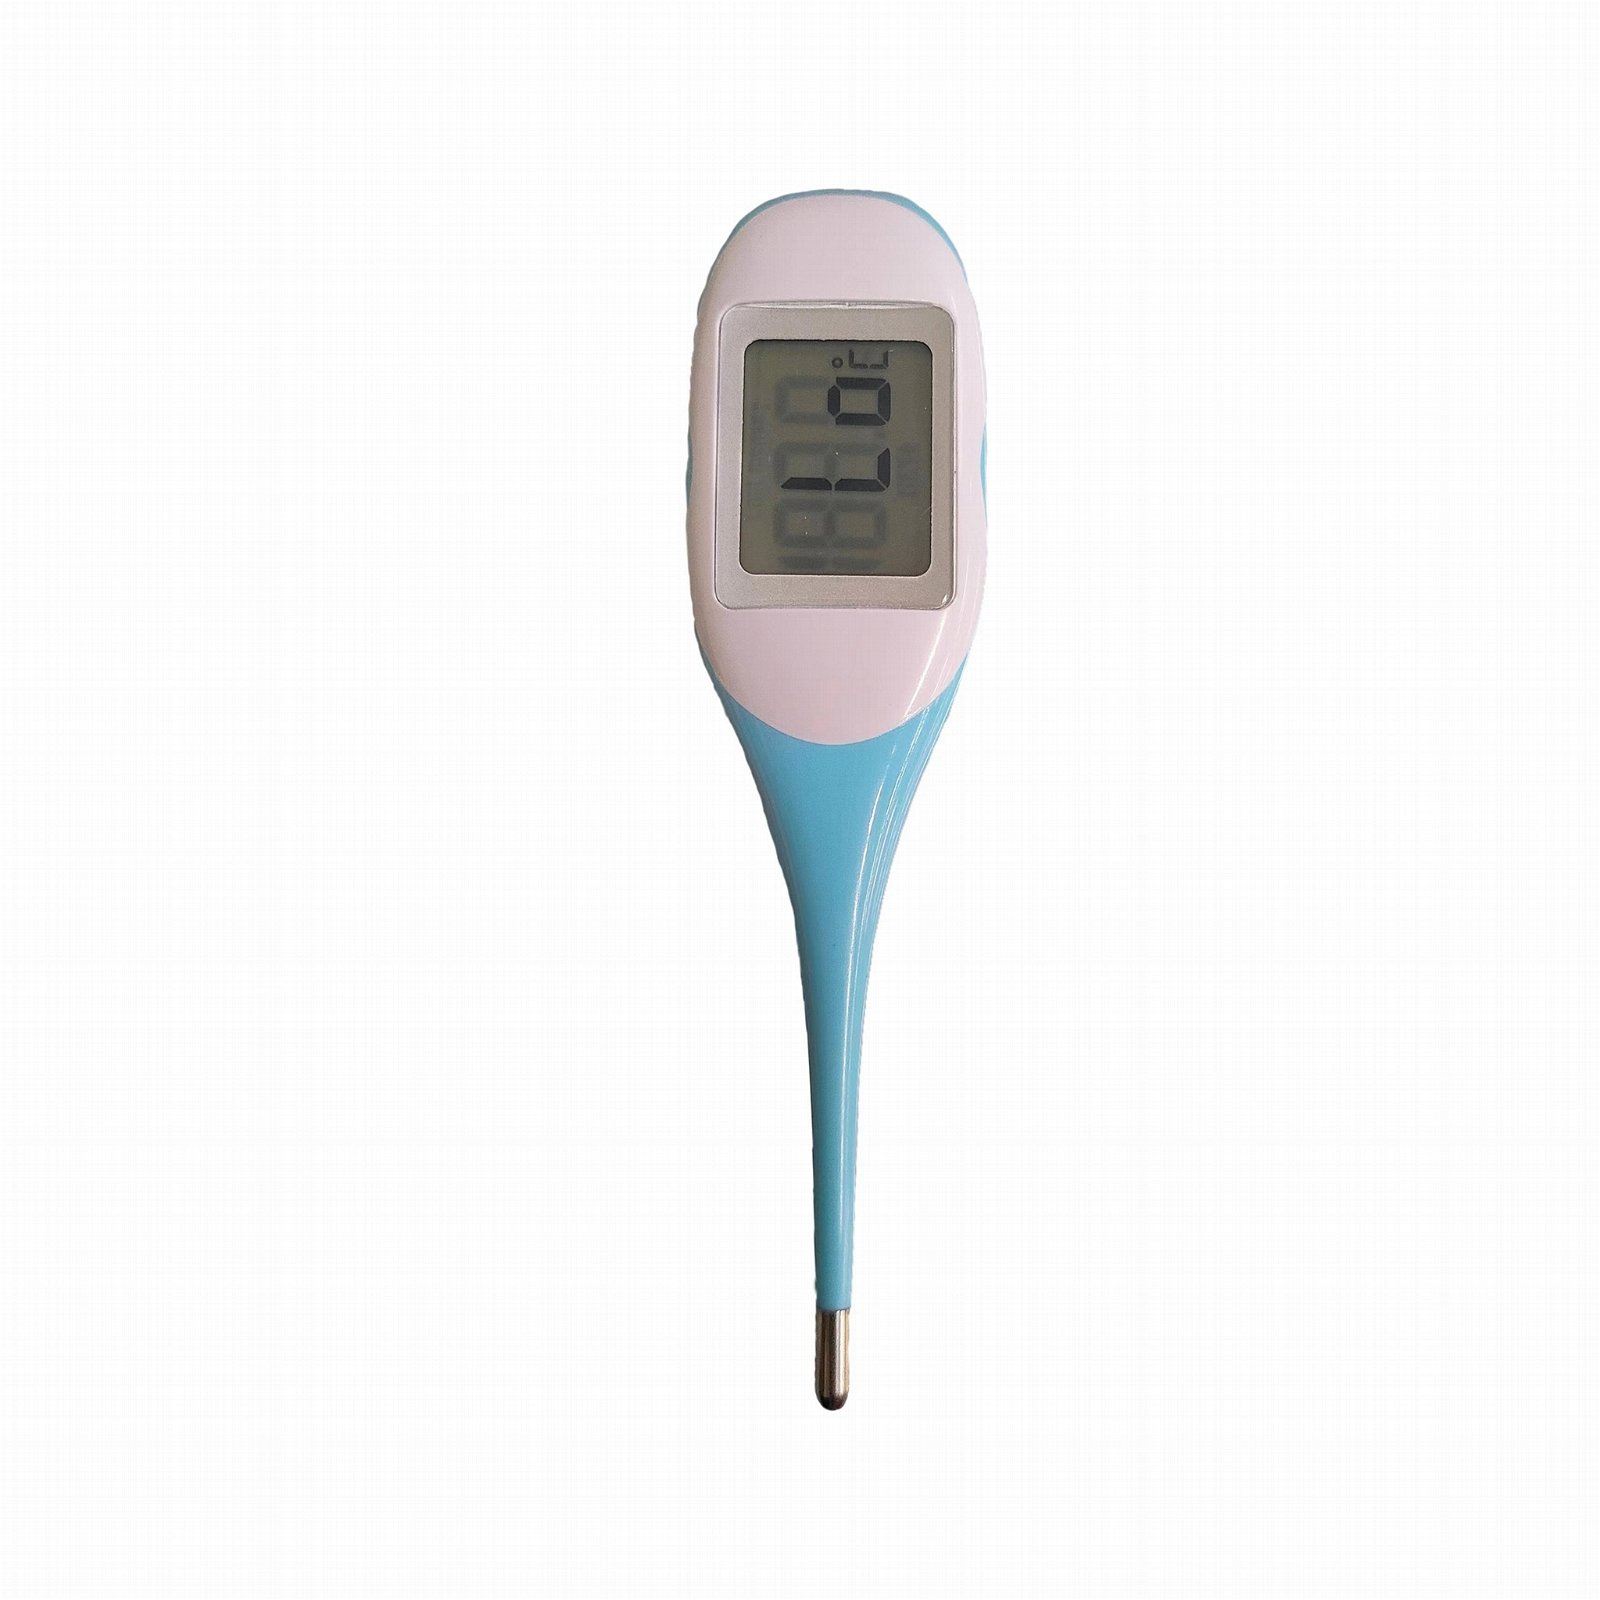 TM21      8 second FEVER GLOW Digital thermometer 3